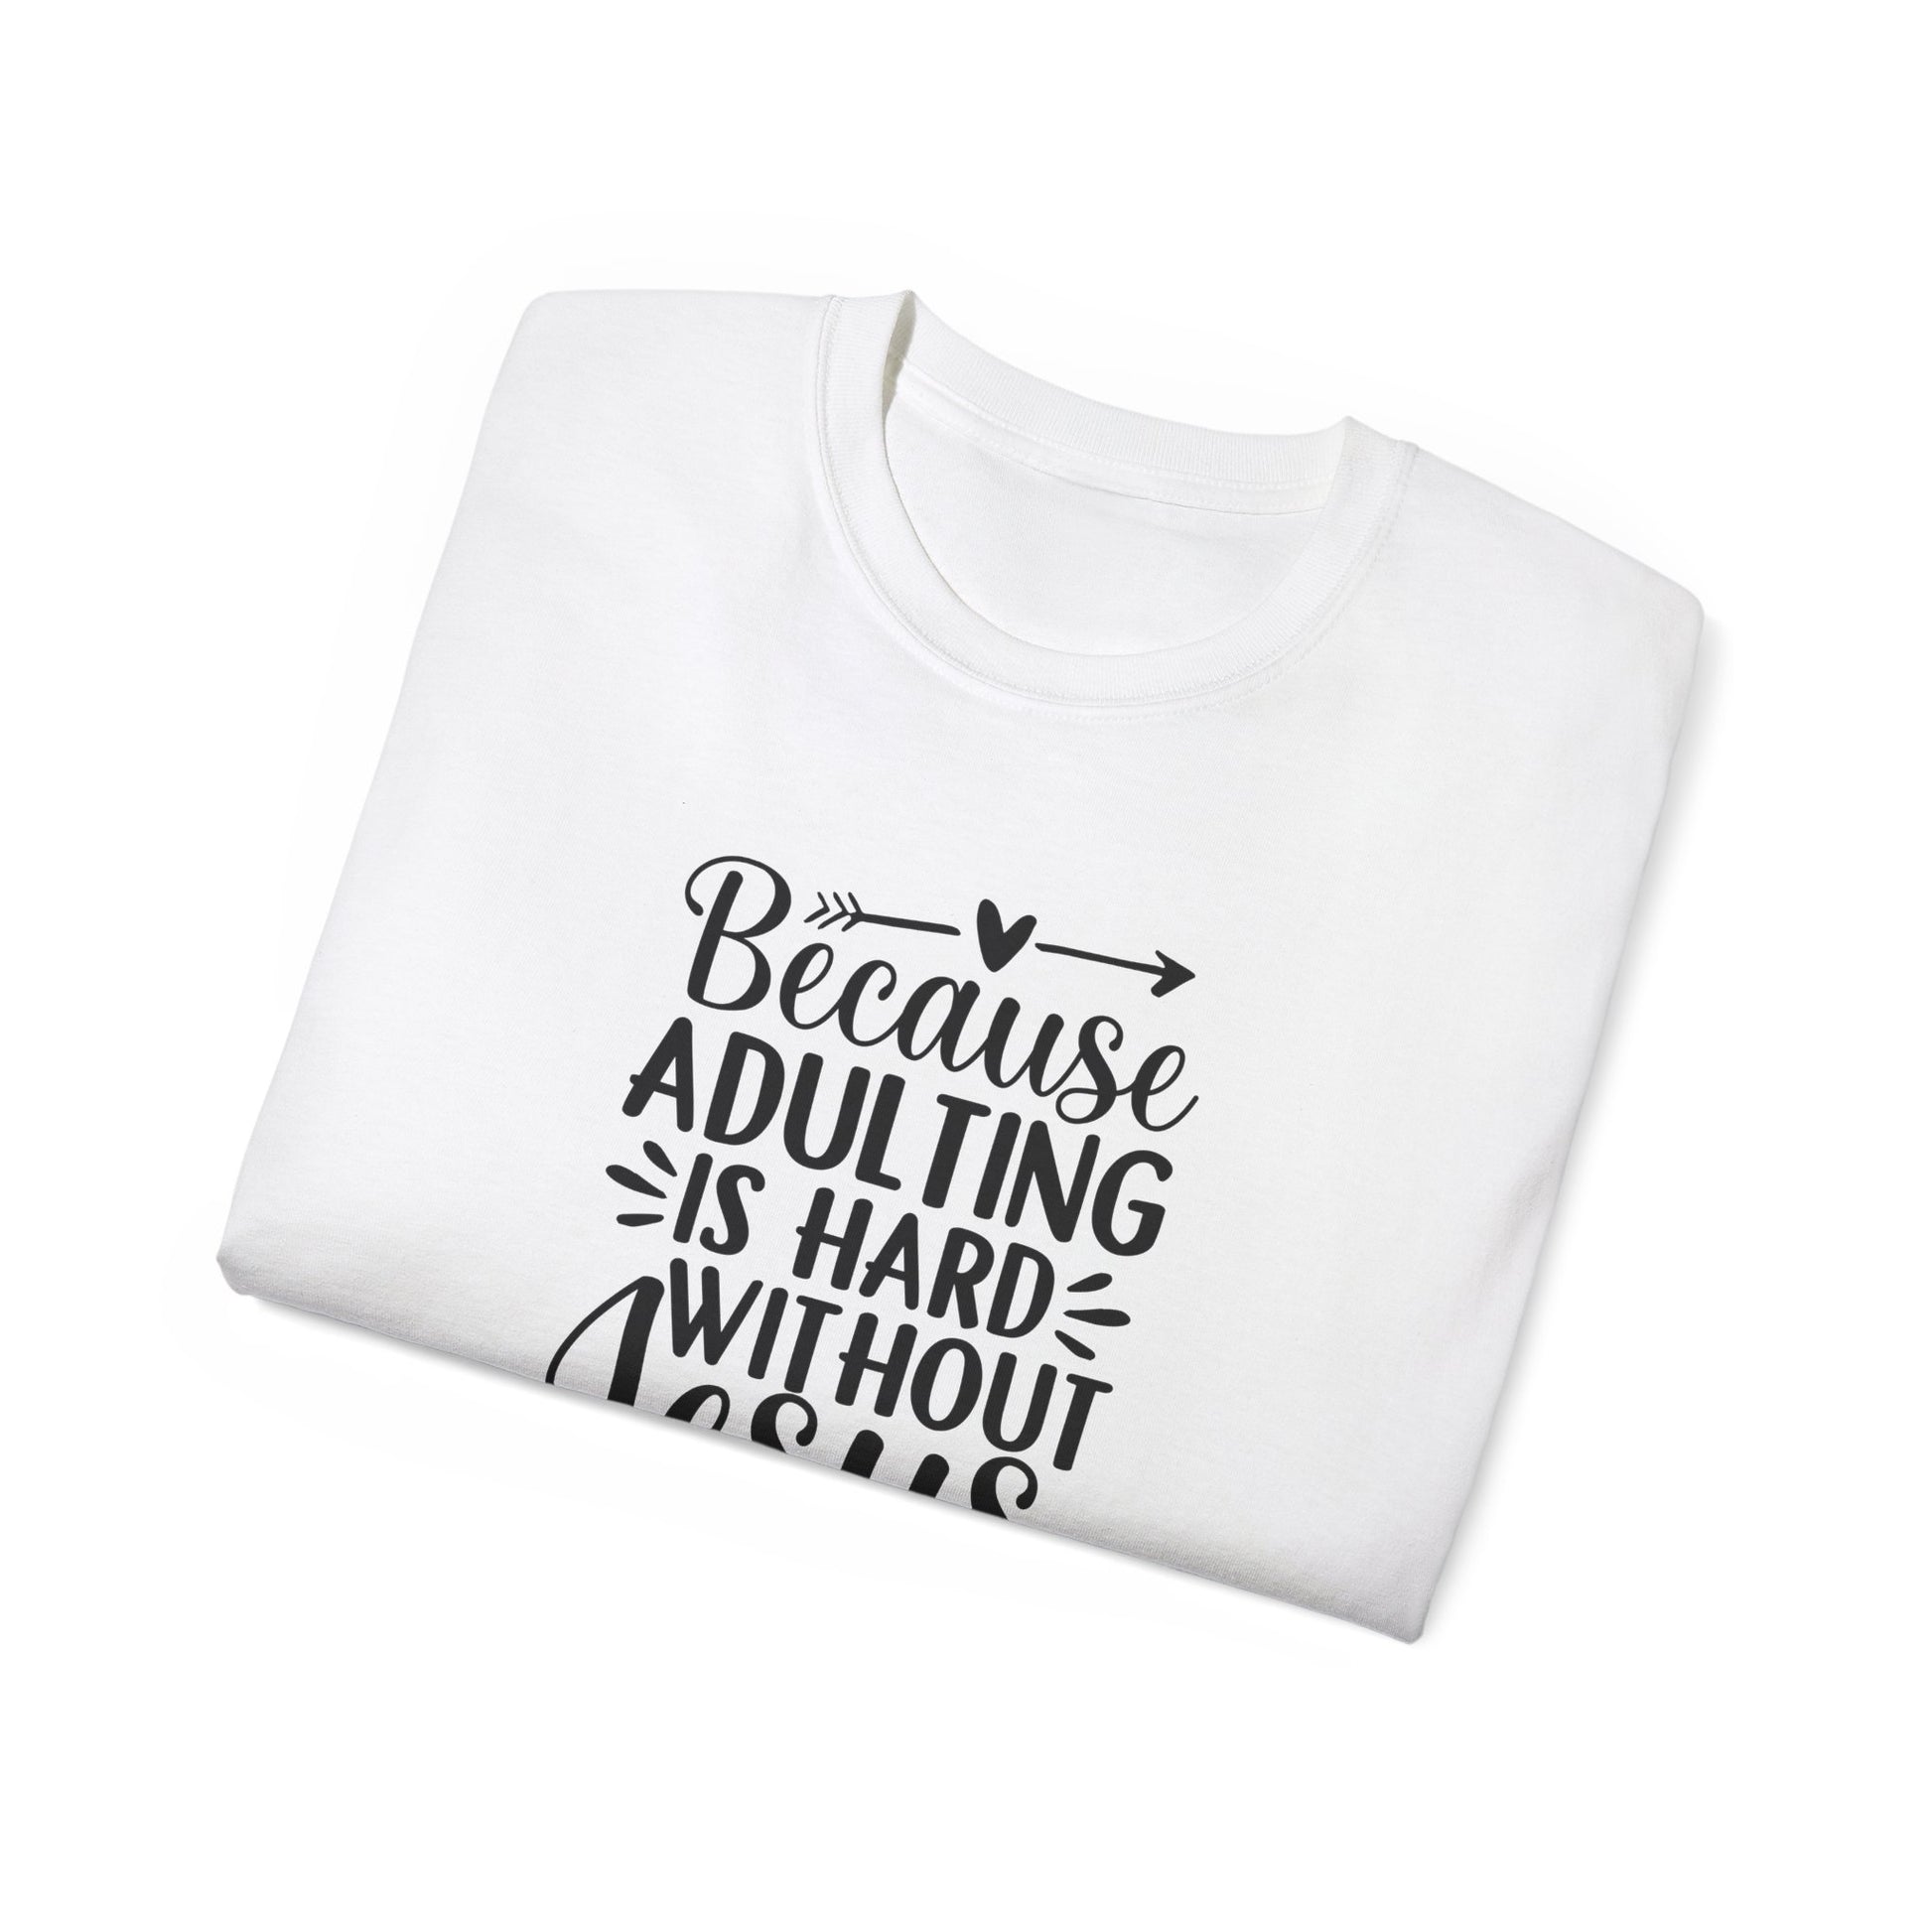 Because Adulting Is Hard without Jesus Unisex Christian Ultra Cotton Tee Printify